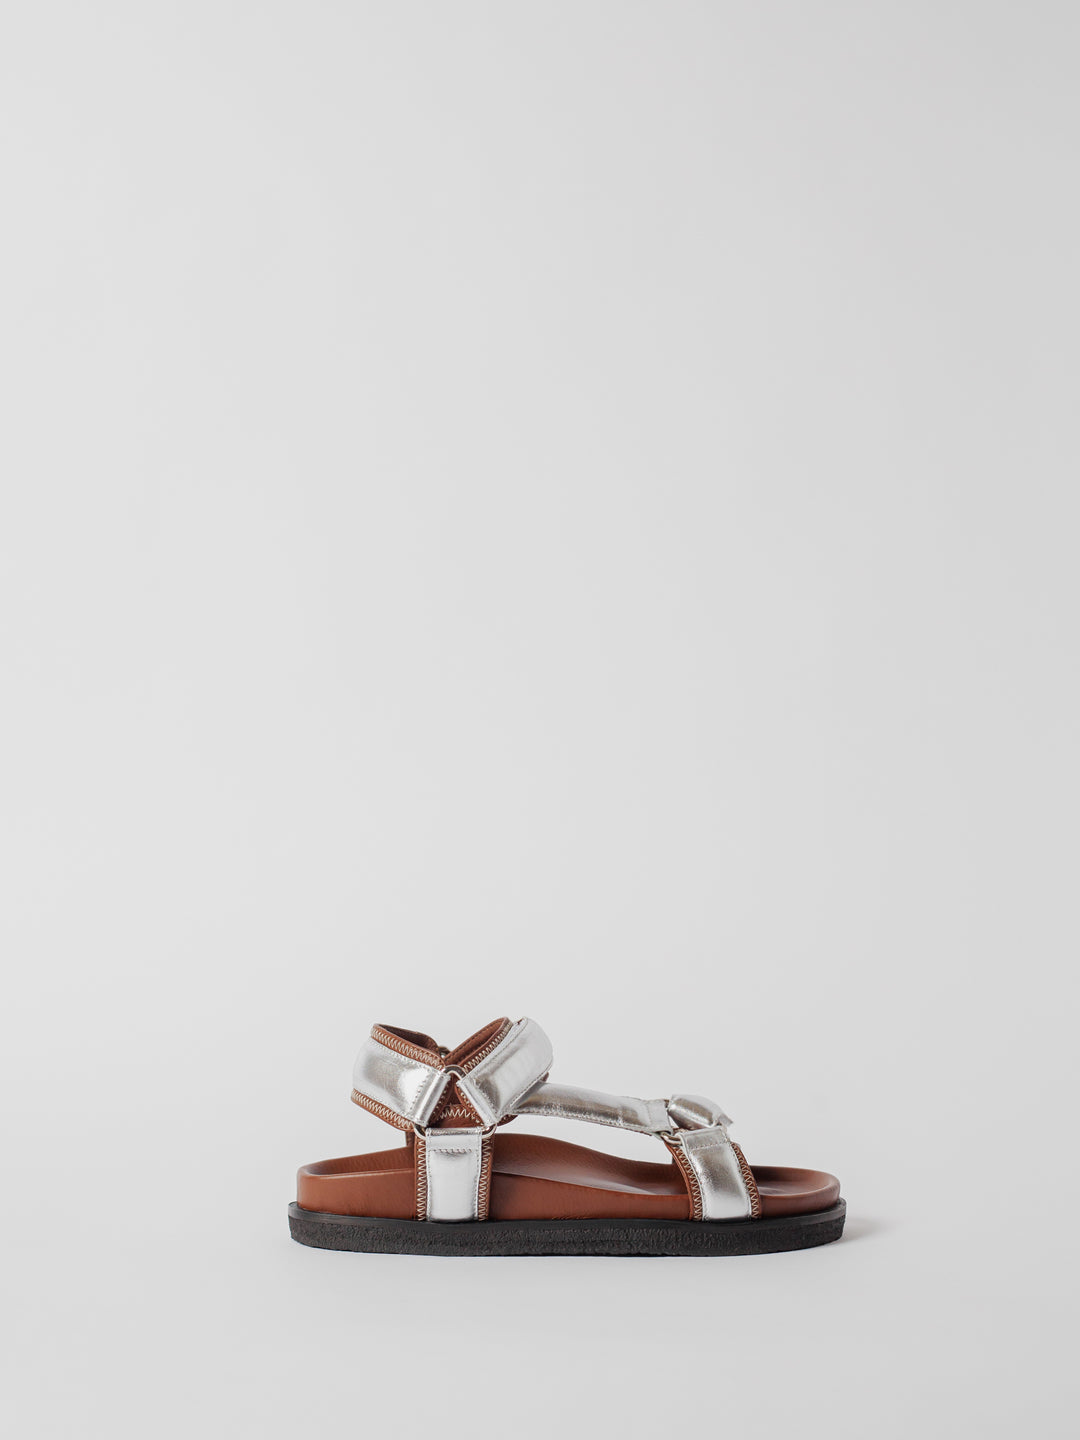 Blankens The Sanremo Sahara SIlver sandal nutty brown and silver leather, contrast stitching in off-white, black real rubber sole